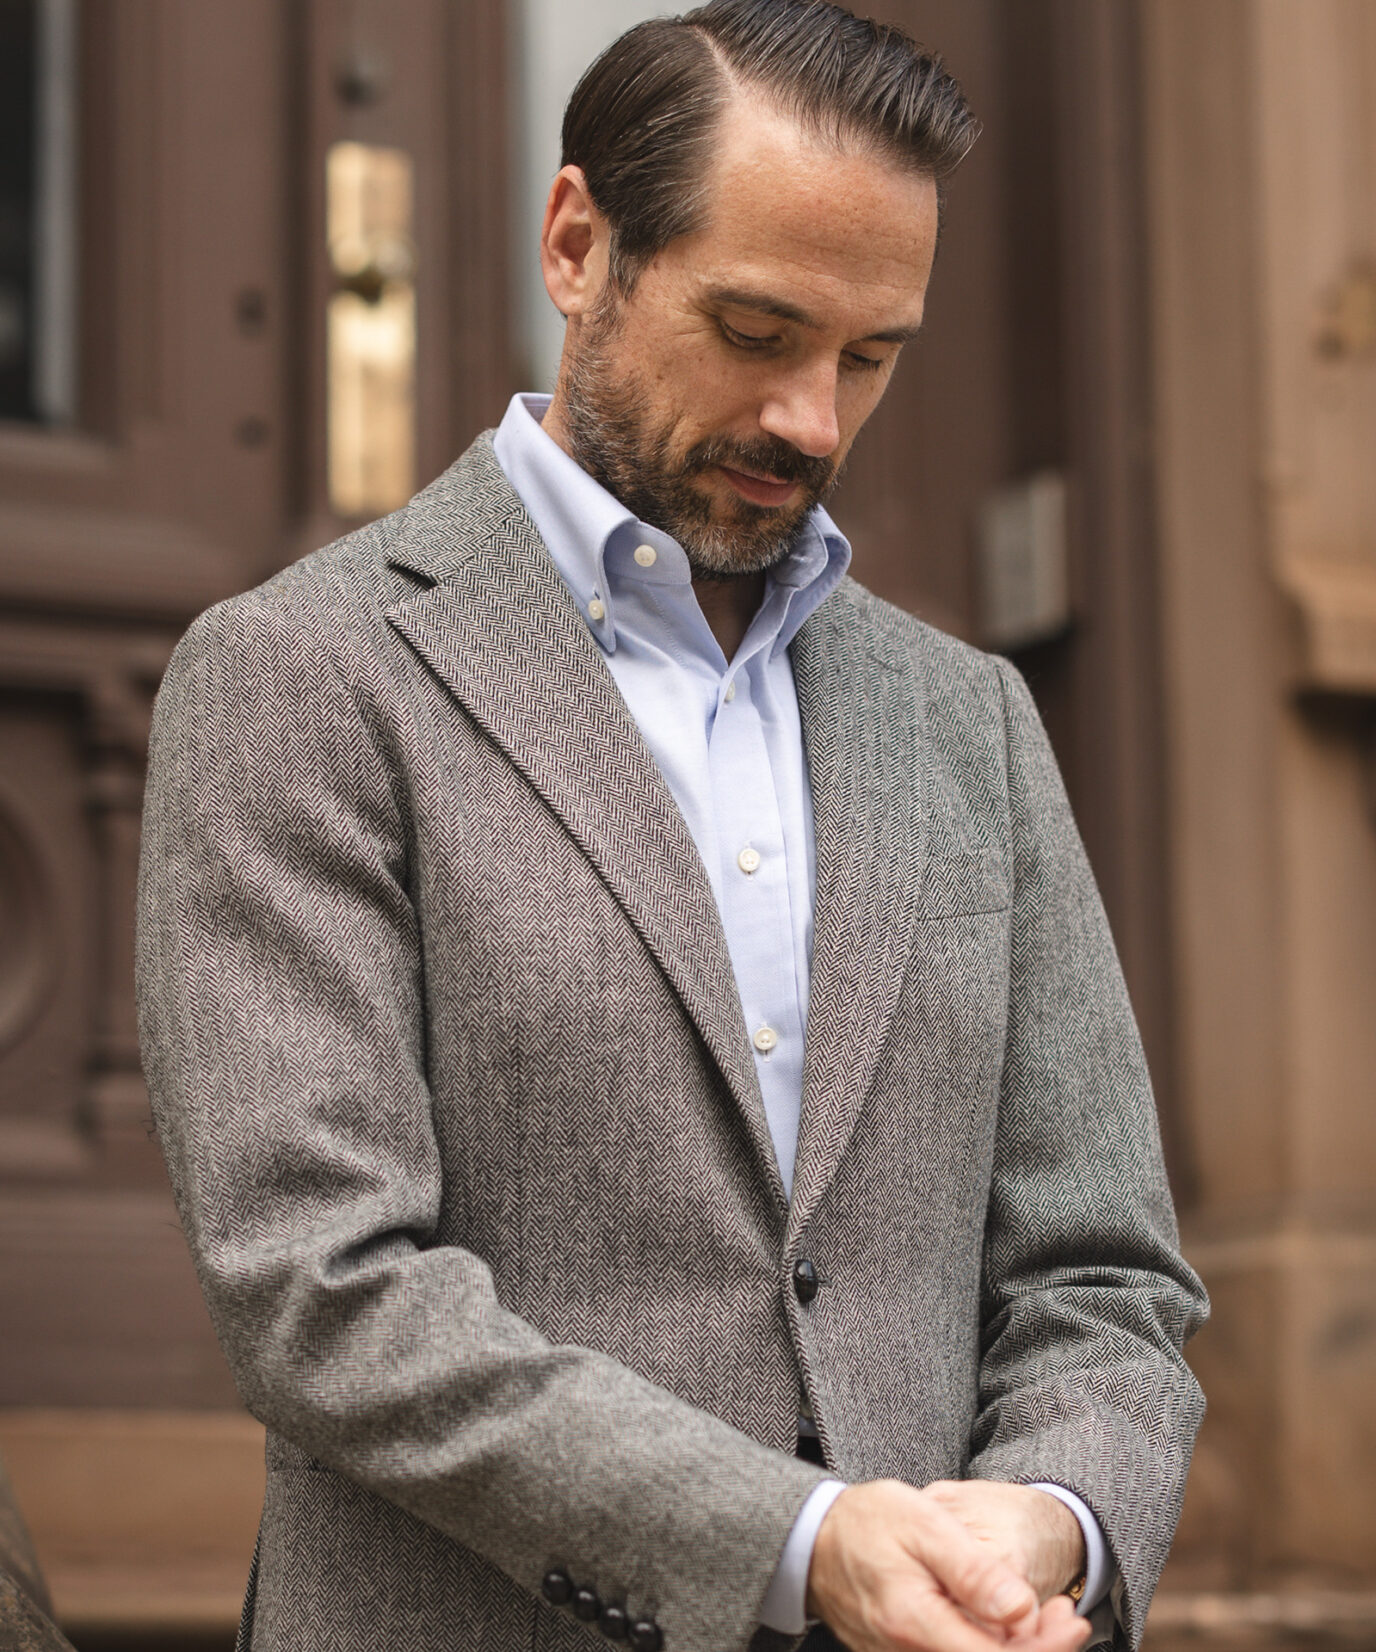 Menswear Must-Have: The Oxford Shirt